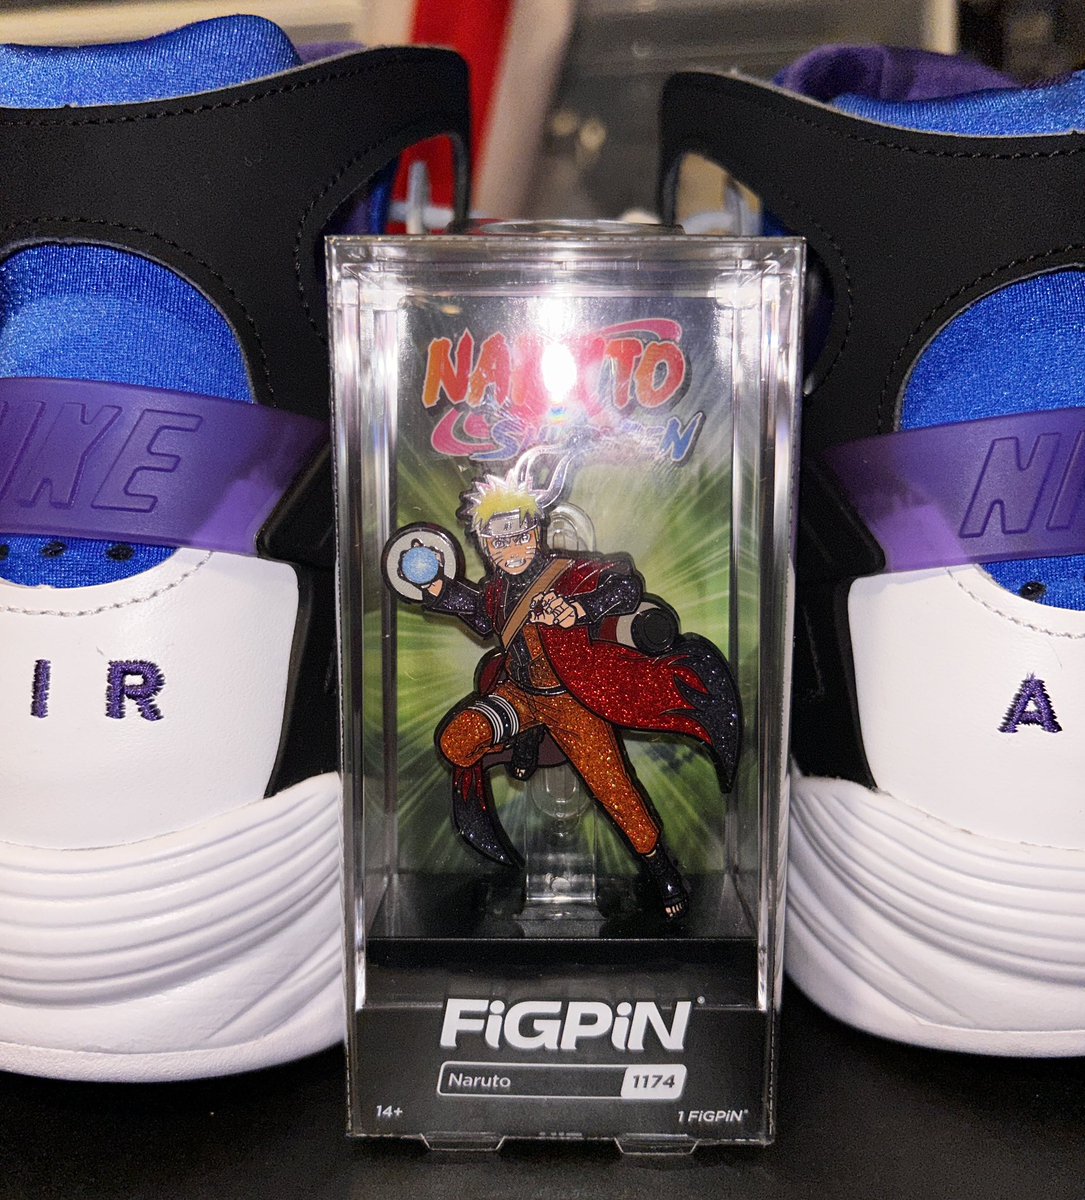 Who likes FIGPIN? Well here is your chance to win This Awesome Naruto Exclusive!!! You know the deal, Like + Follow+ Retweet for you chance to win. This will be given away TONIGHT AT 10 PM EST. Don’t Miss Out!!!